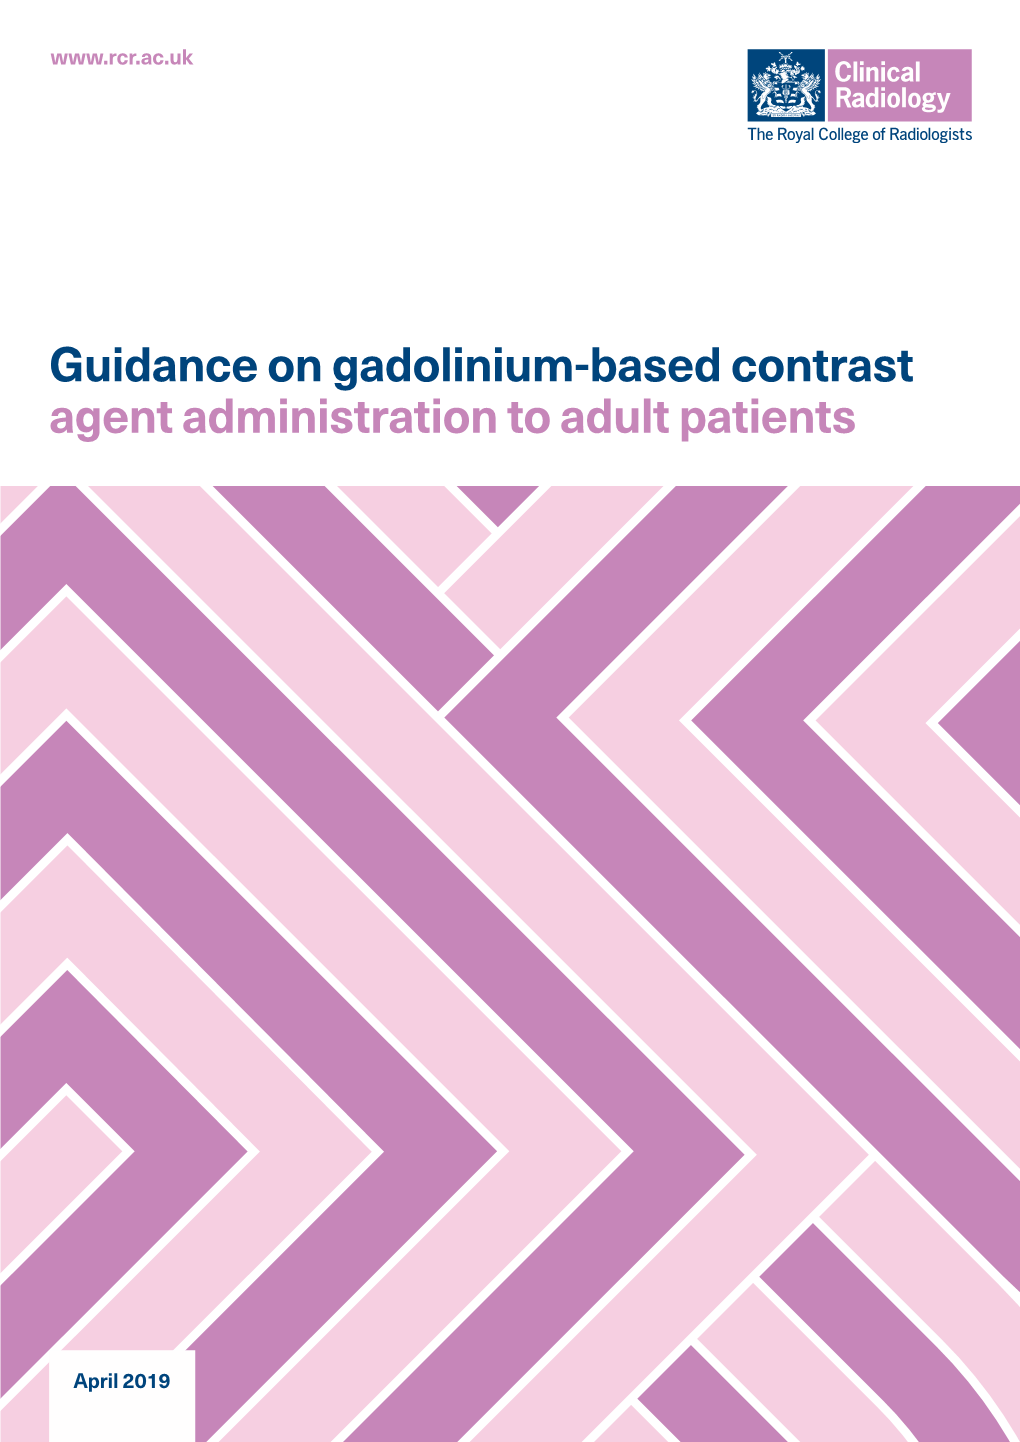 Guidance on Gadolinium-Based Contrast Agent Administration to Adult Patients